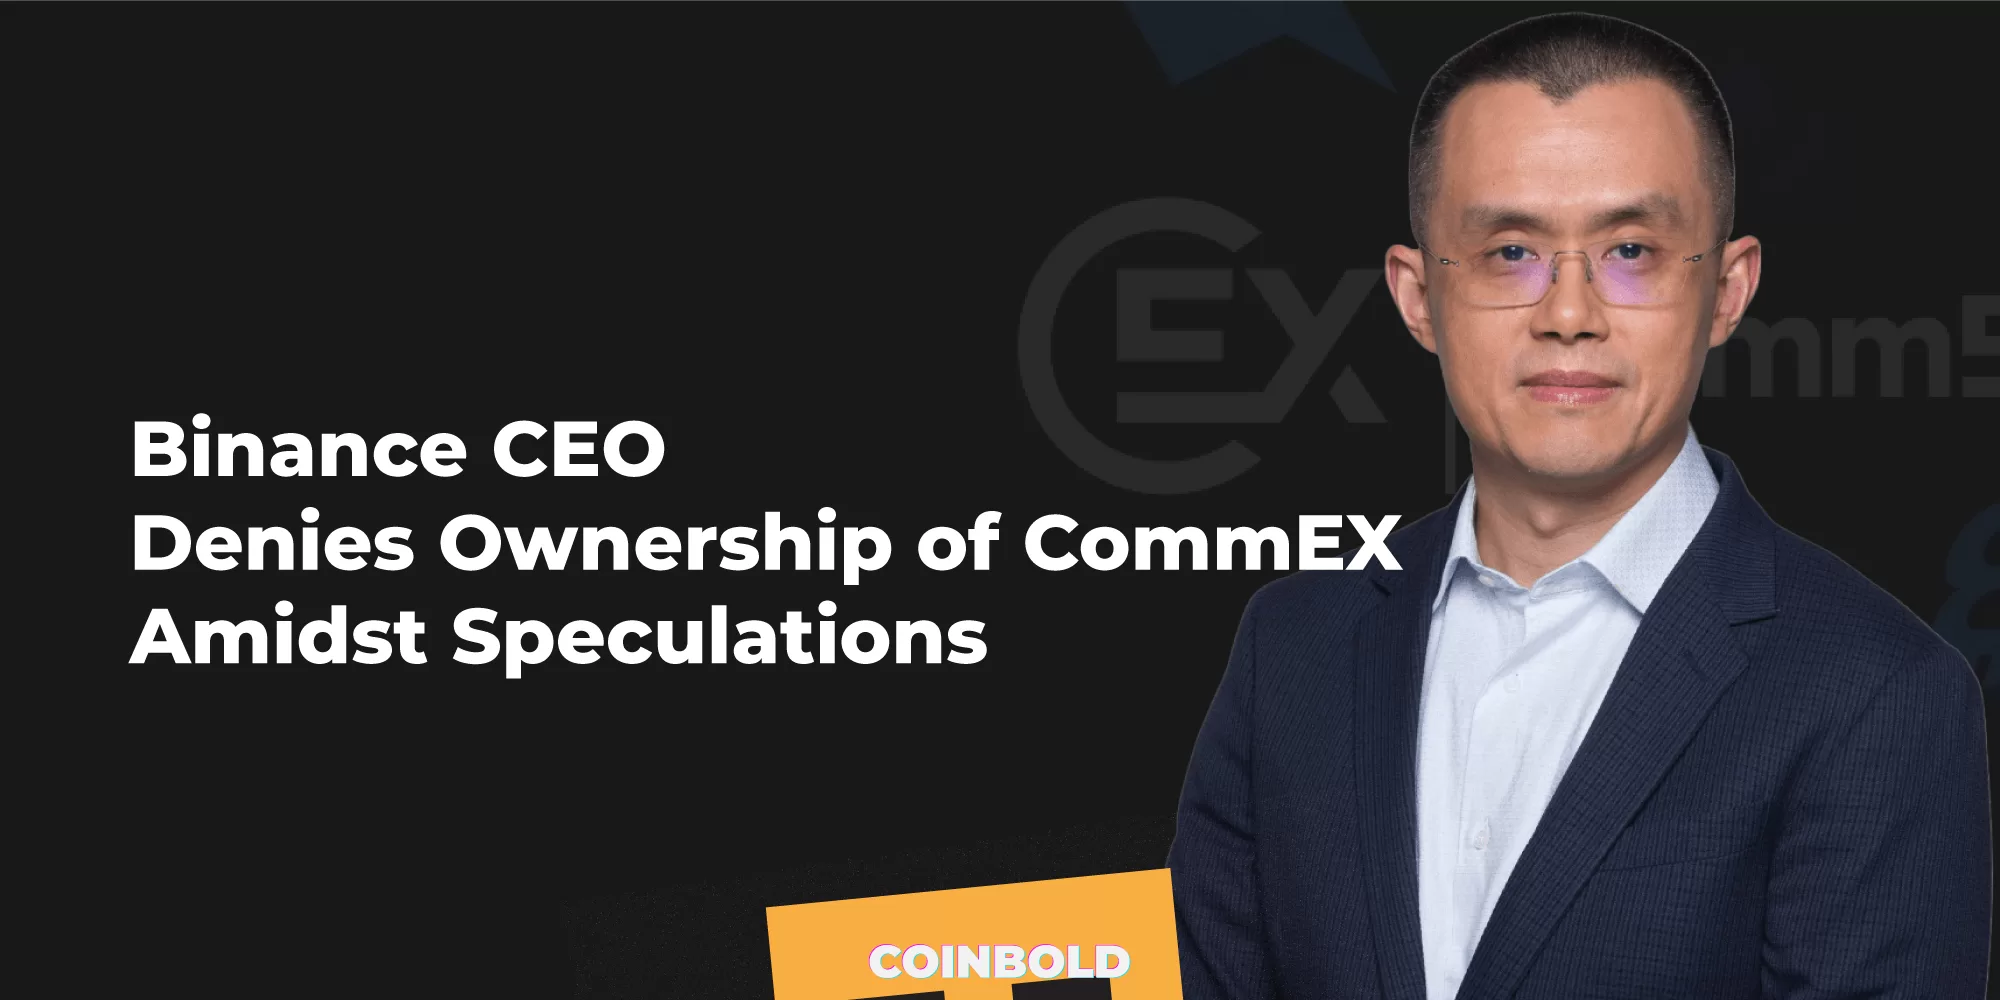 Binance CEO Denies Ownership of CommEX Amidst Speculations